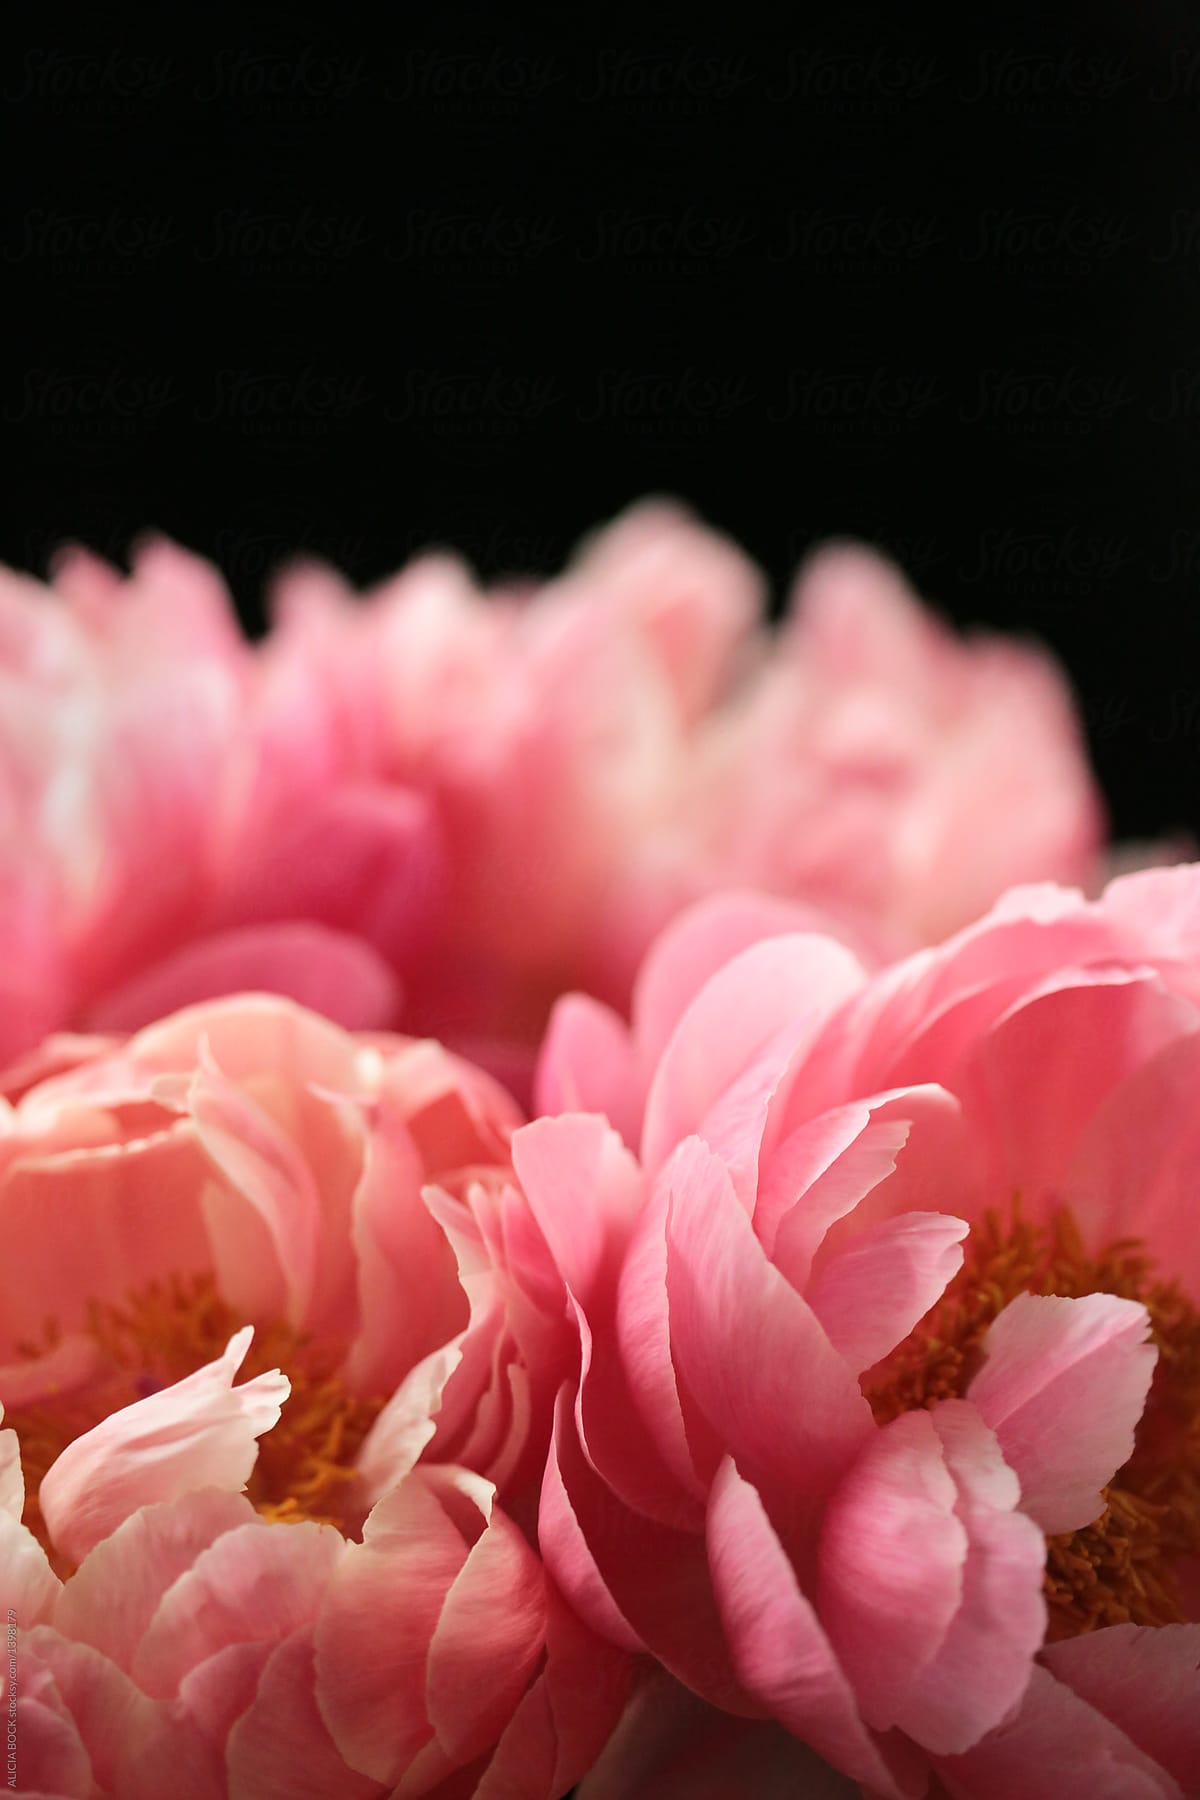 Stunning Pink Peony Flowers Against A Black Background By Alicia Bock Stocksy United